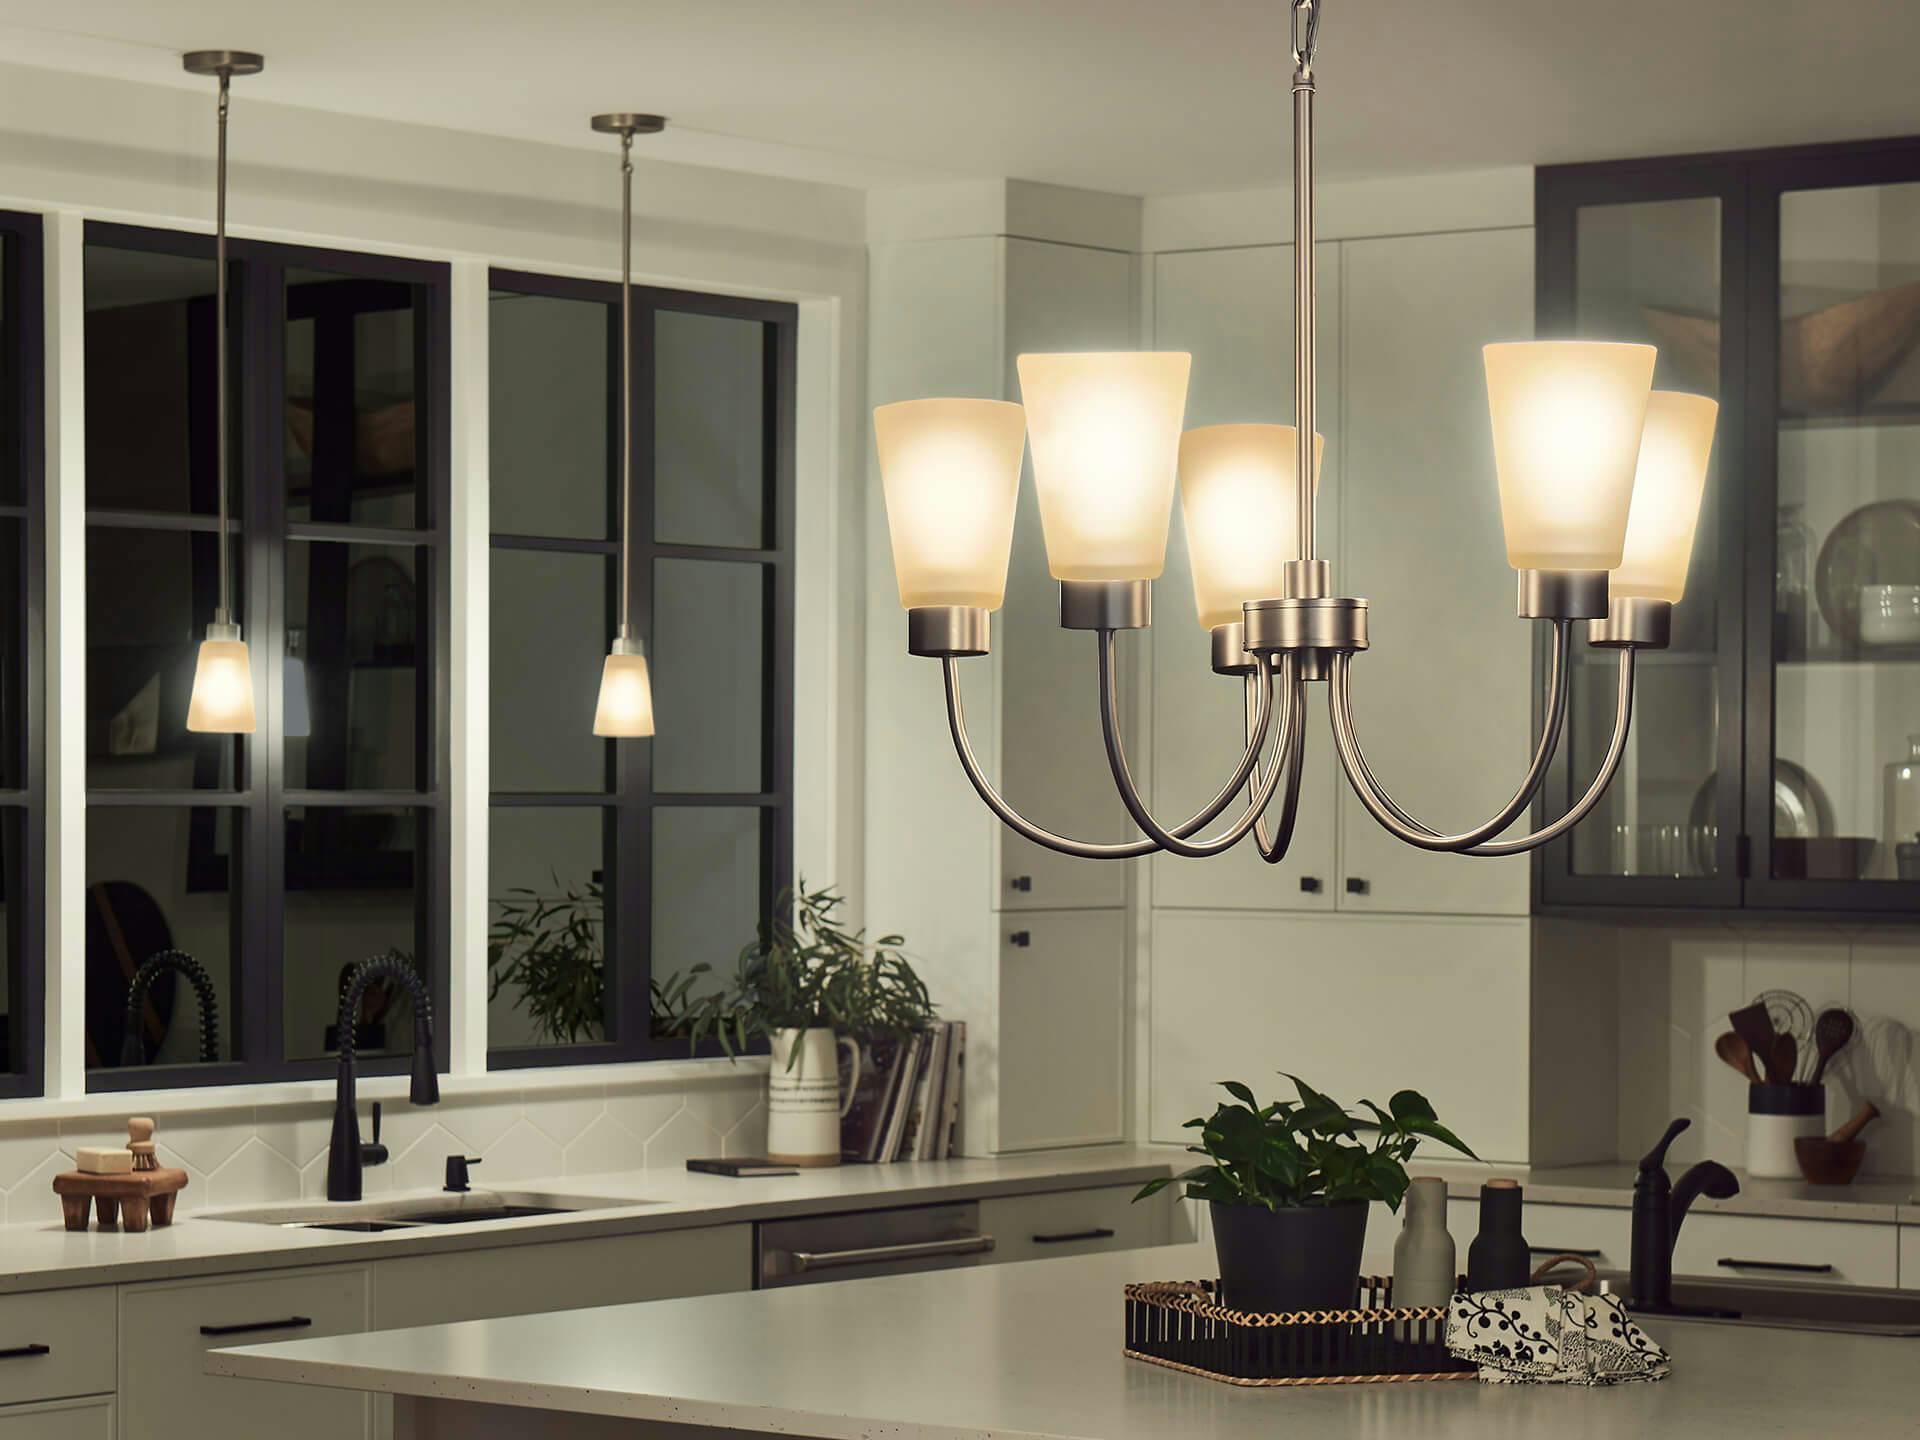 Modern kitchen with Emra chandelier and pendant lights over kitchen sink at night in brushed nickel finish